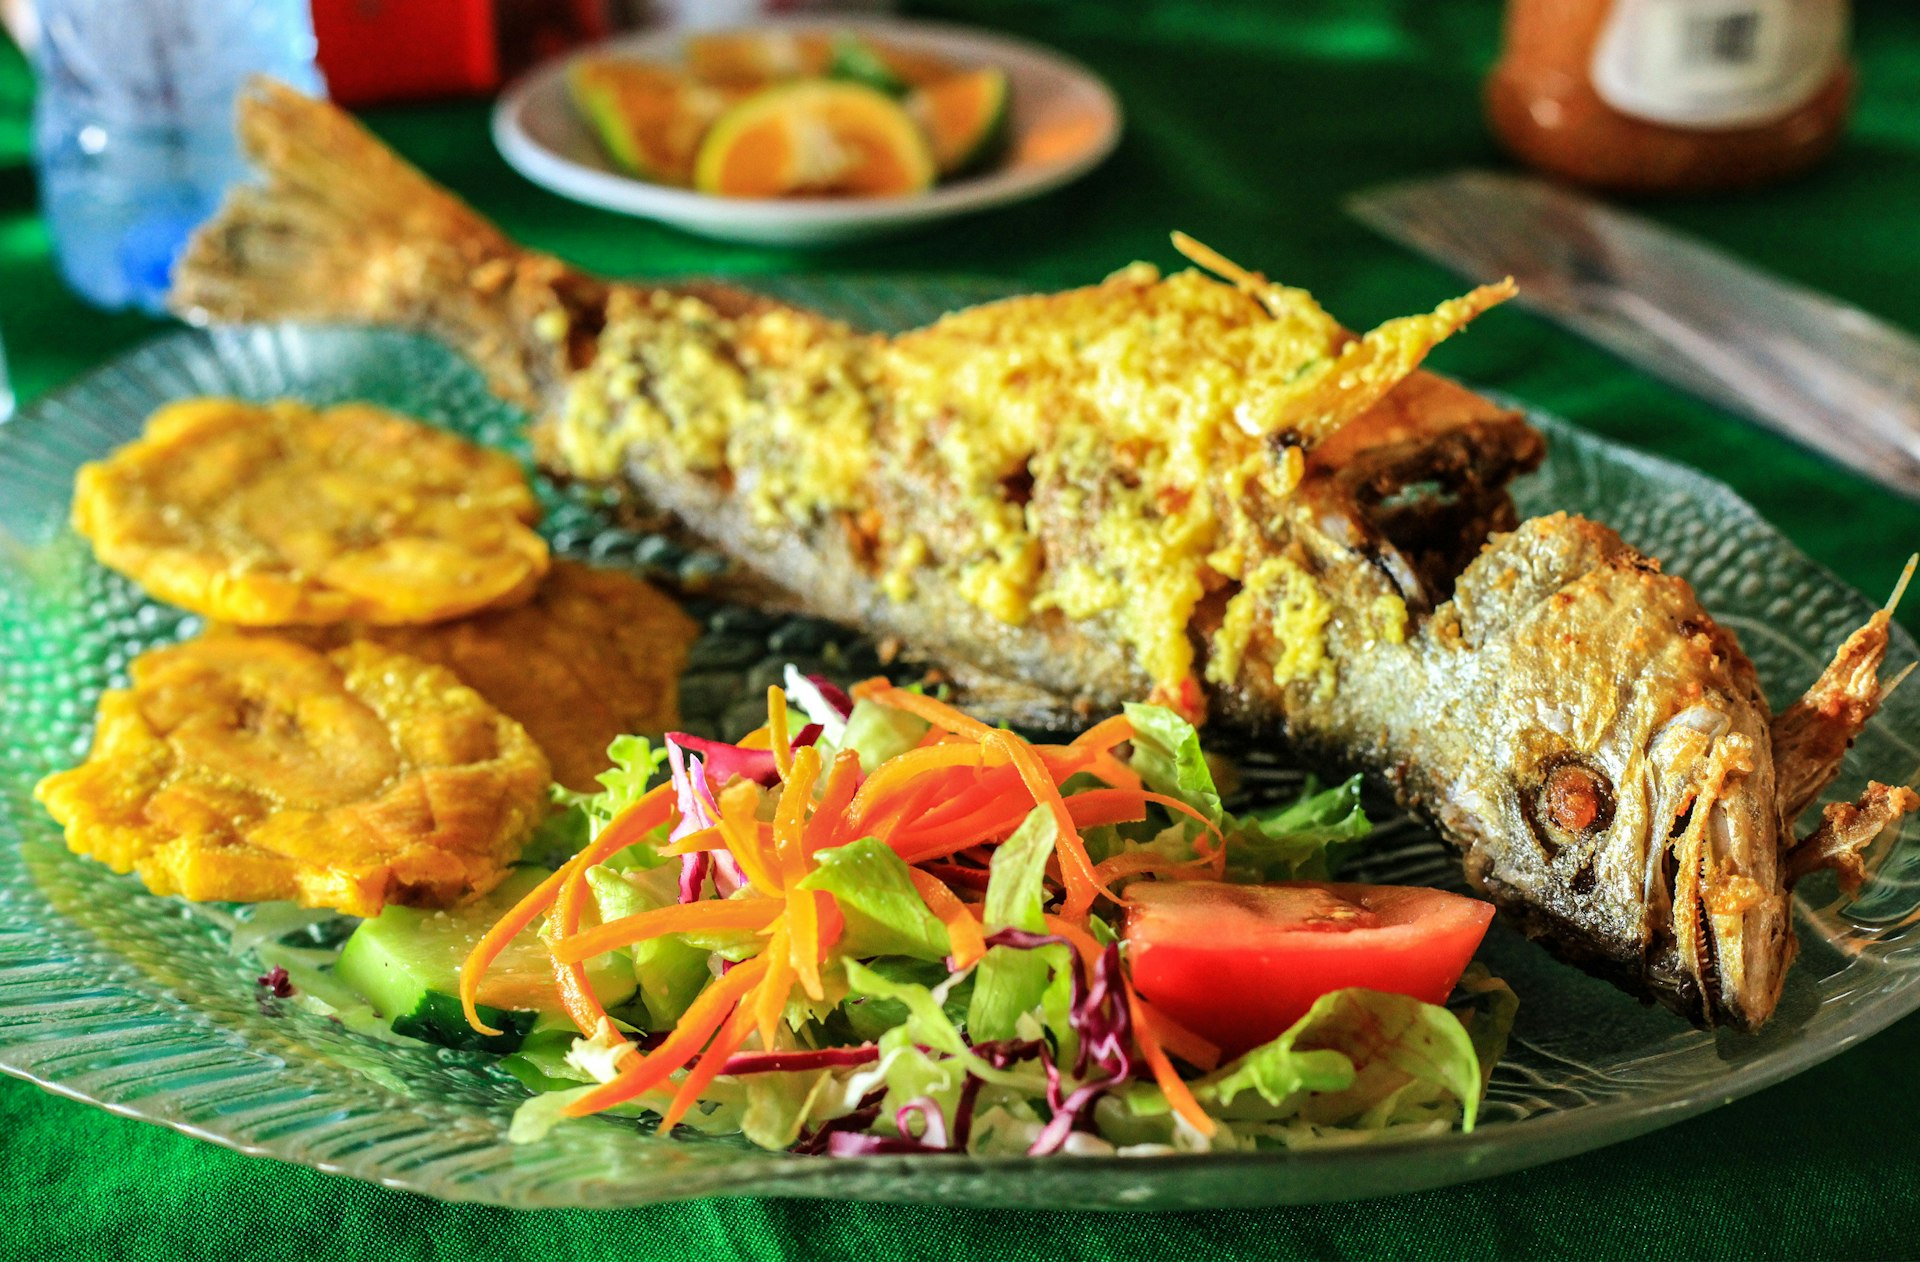 Fried fish with plantains and salad, a Puerto Rican staple